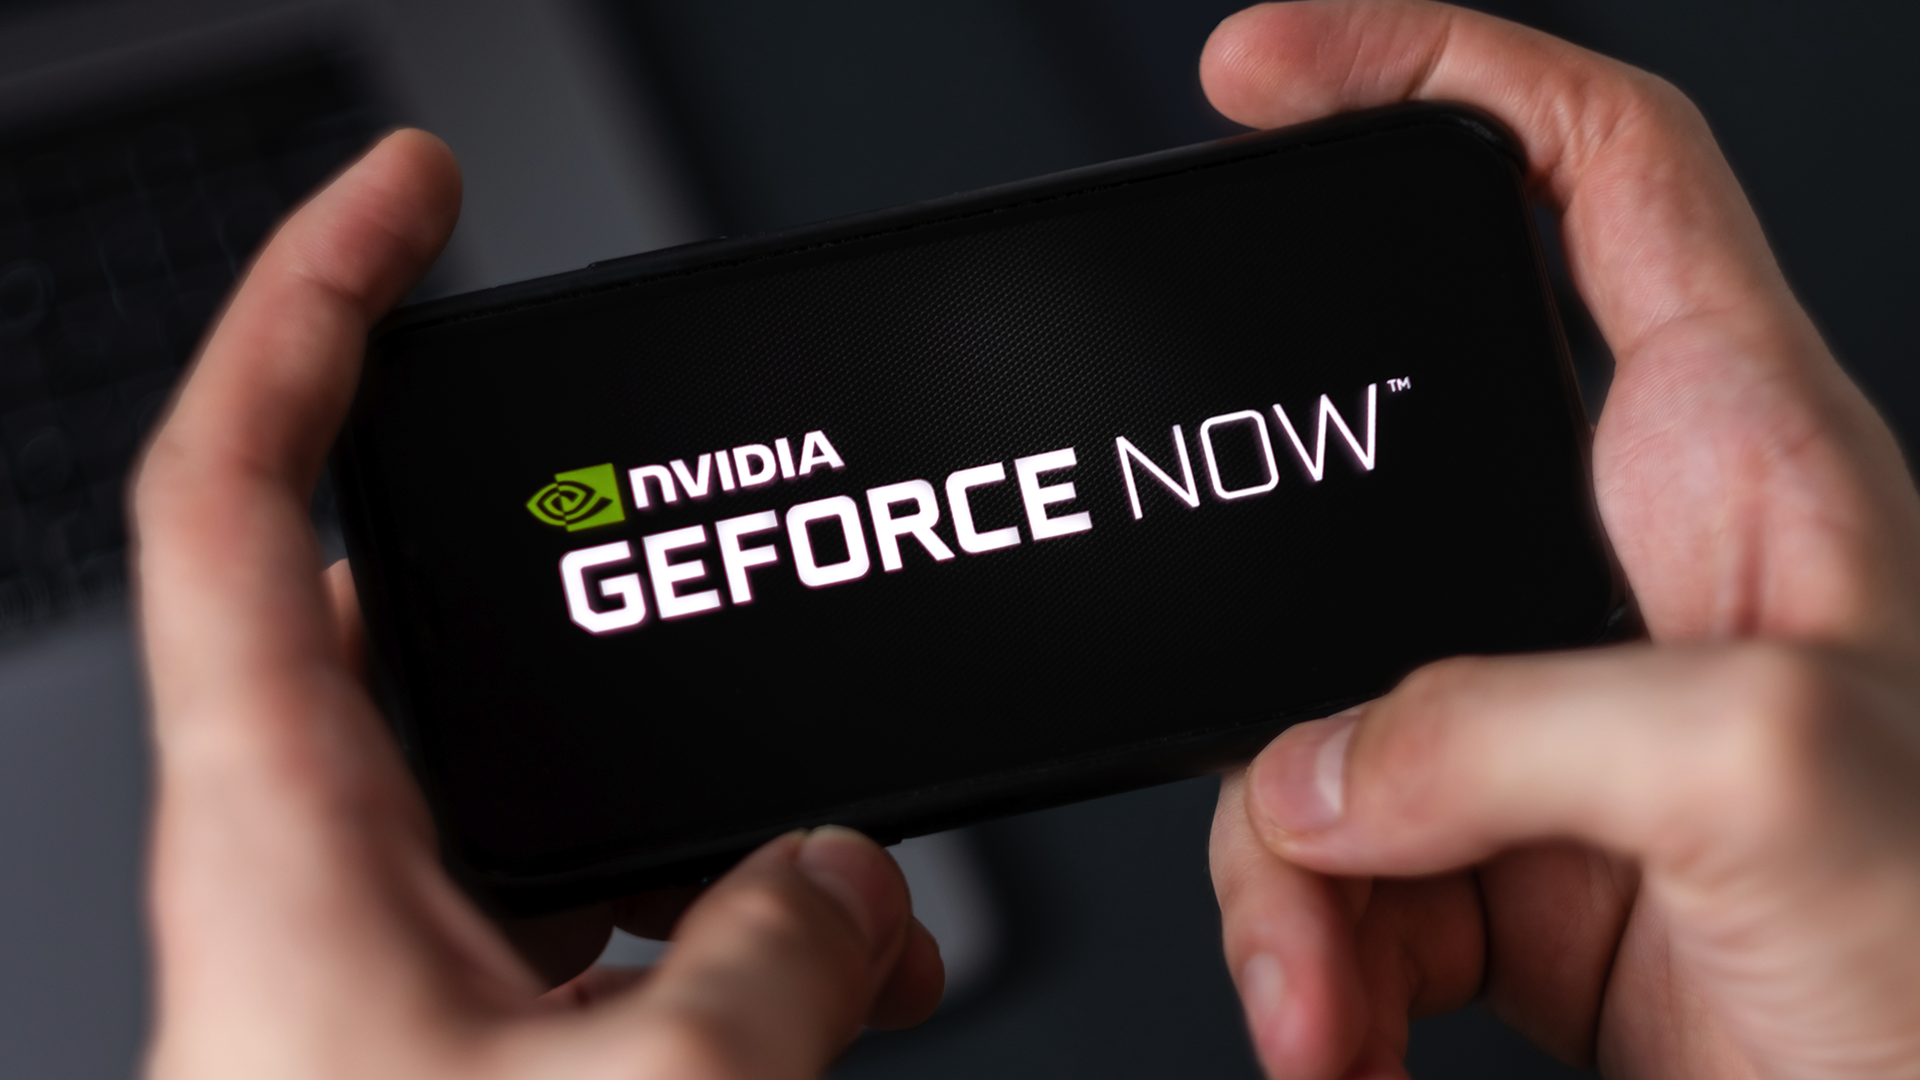 Play games for free on your Chromebook with GeForce Now